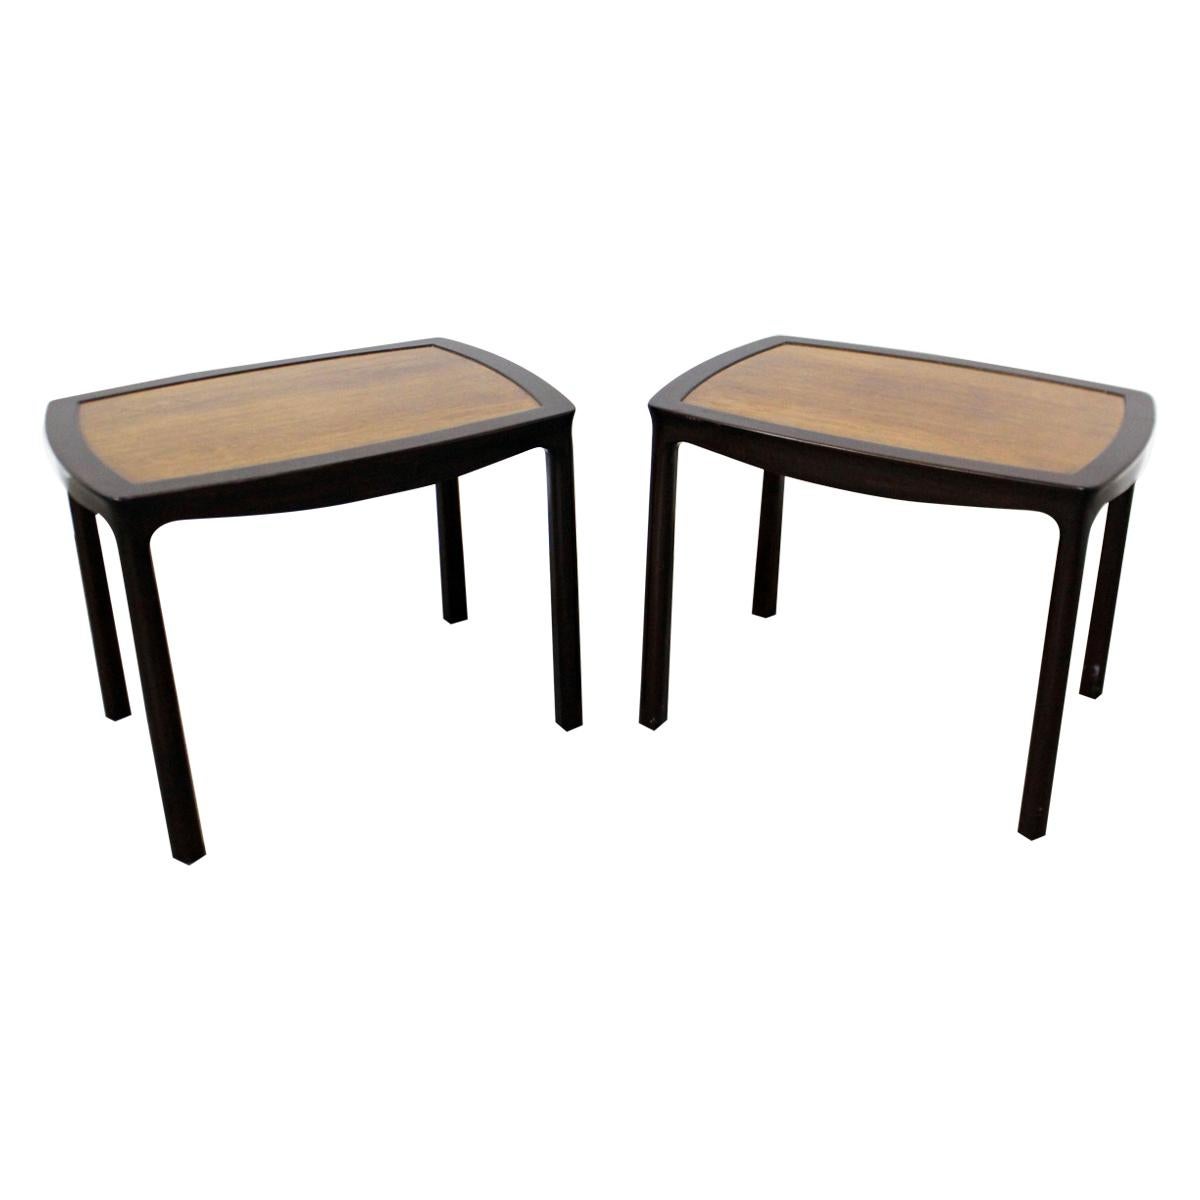 Pair of Mid-Century Modern Asian Edward Wormley for Dunbar Rosewood End Tables